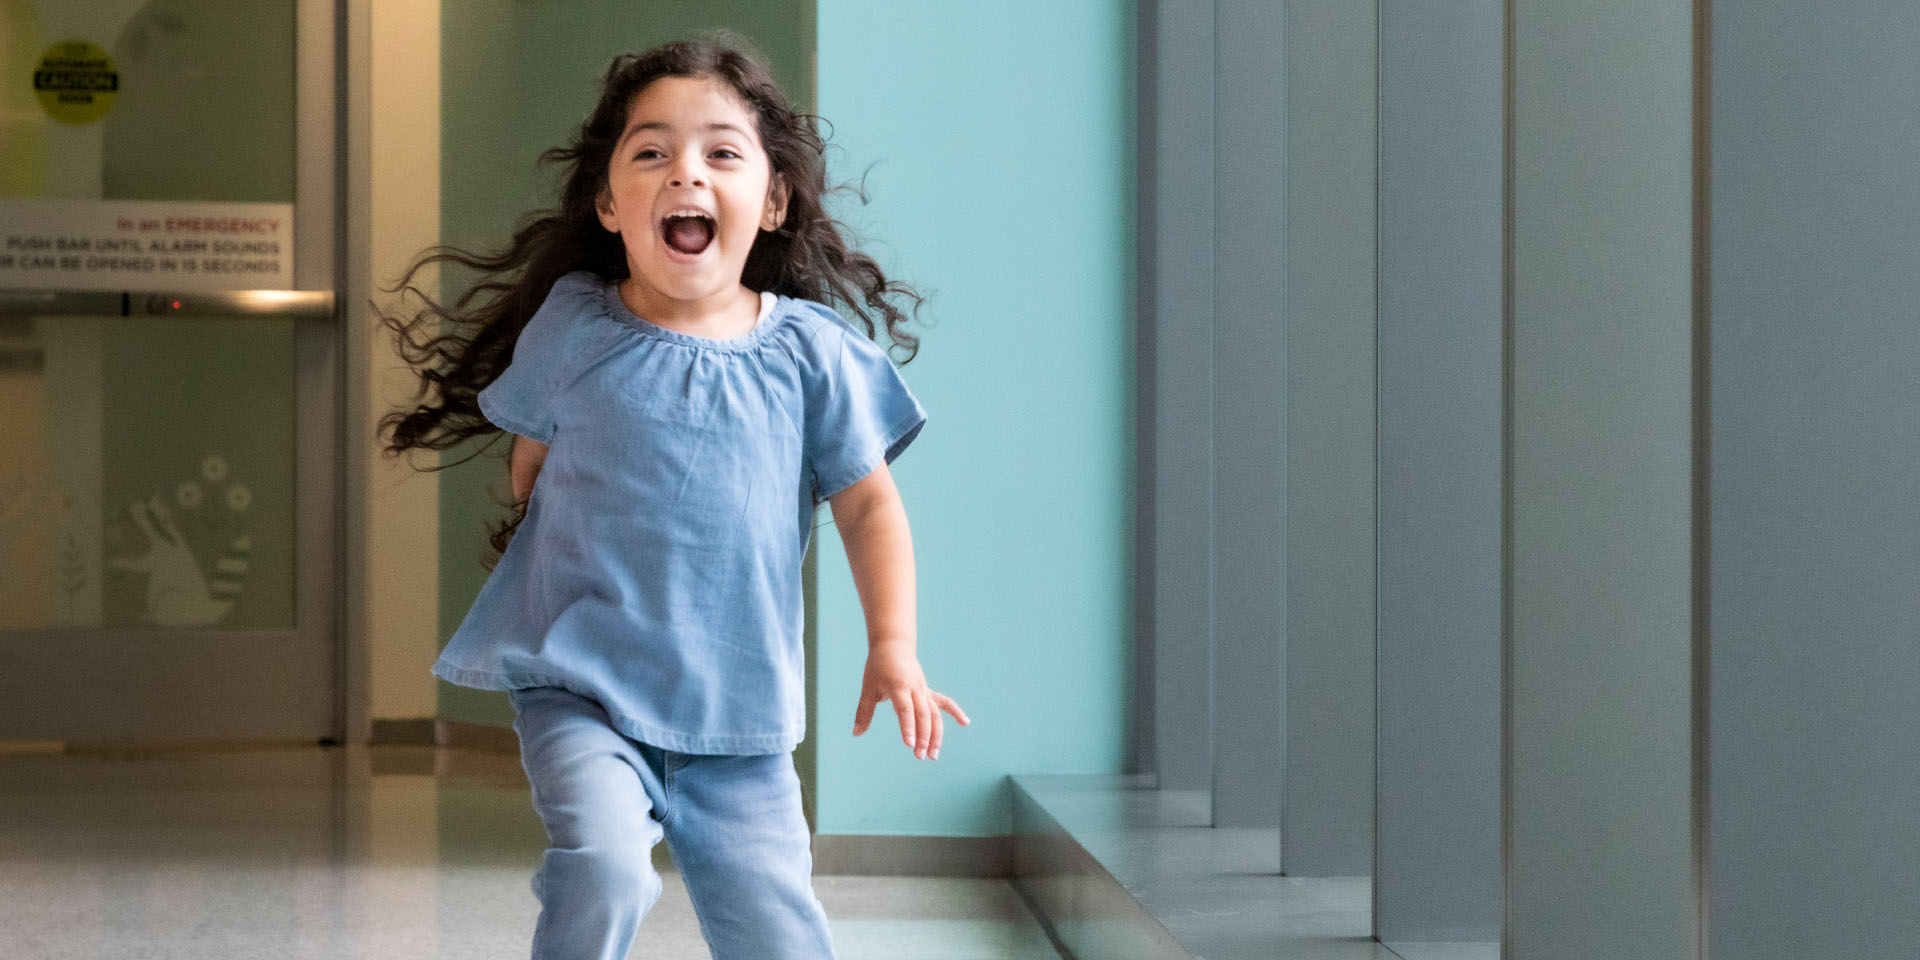 Young girl in blue runs down a hall laughing